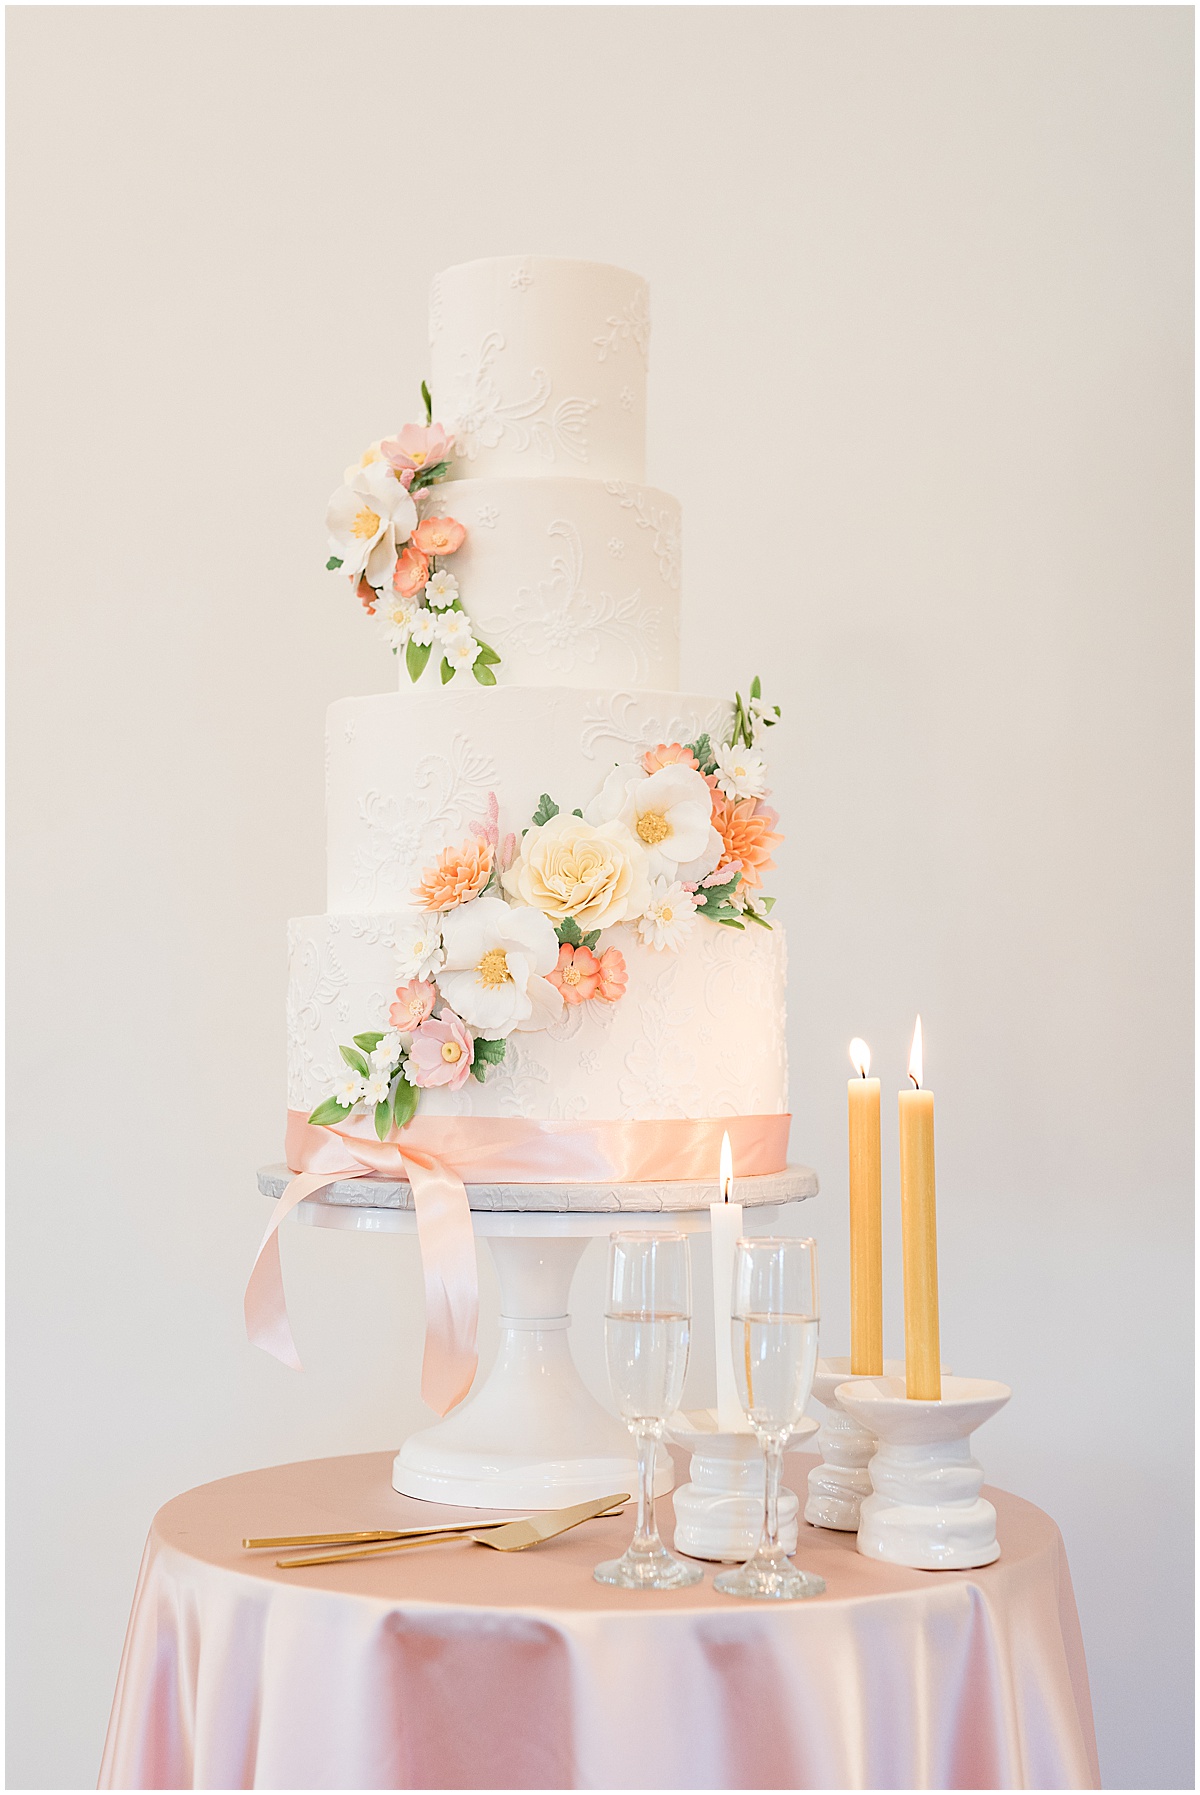 Summer-inspired wedding cake by Classic Cakes—a bakery in Carmel, Indiana